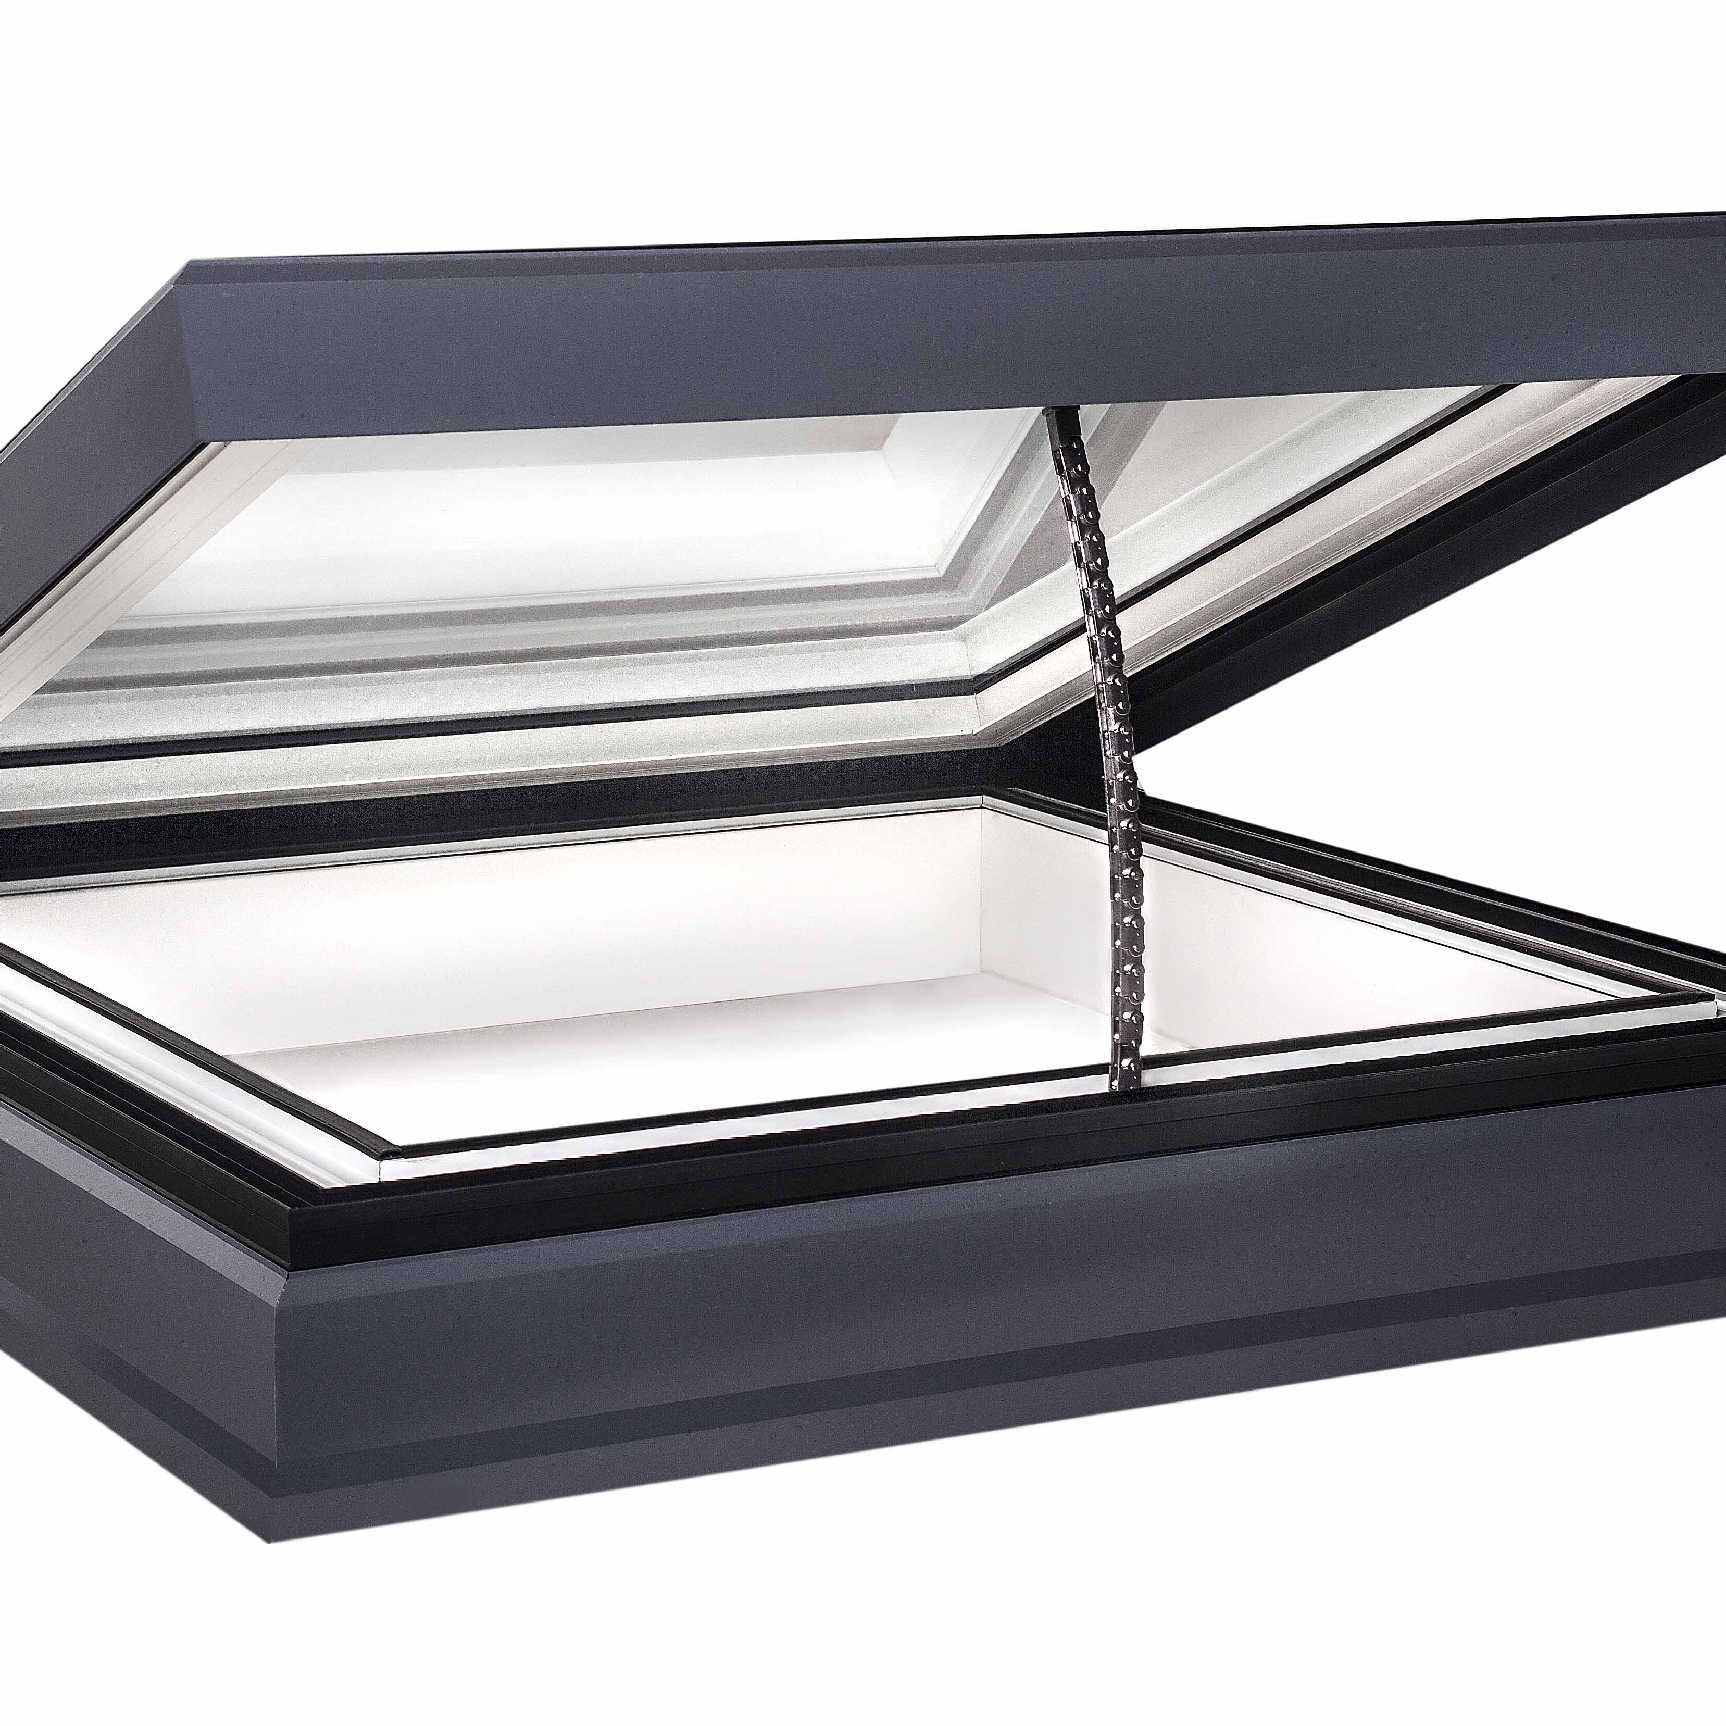 Affordable EcoGard Flat Roof light, Triple Glazed, Electric Opening, 1,000mm x 1,500mm